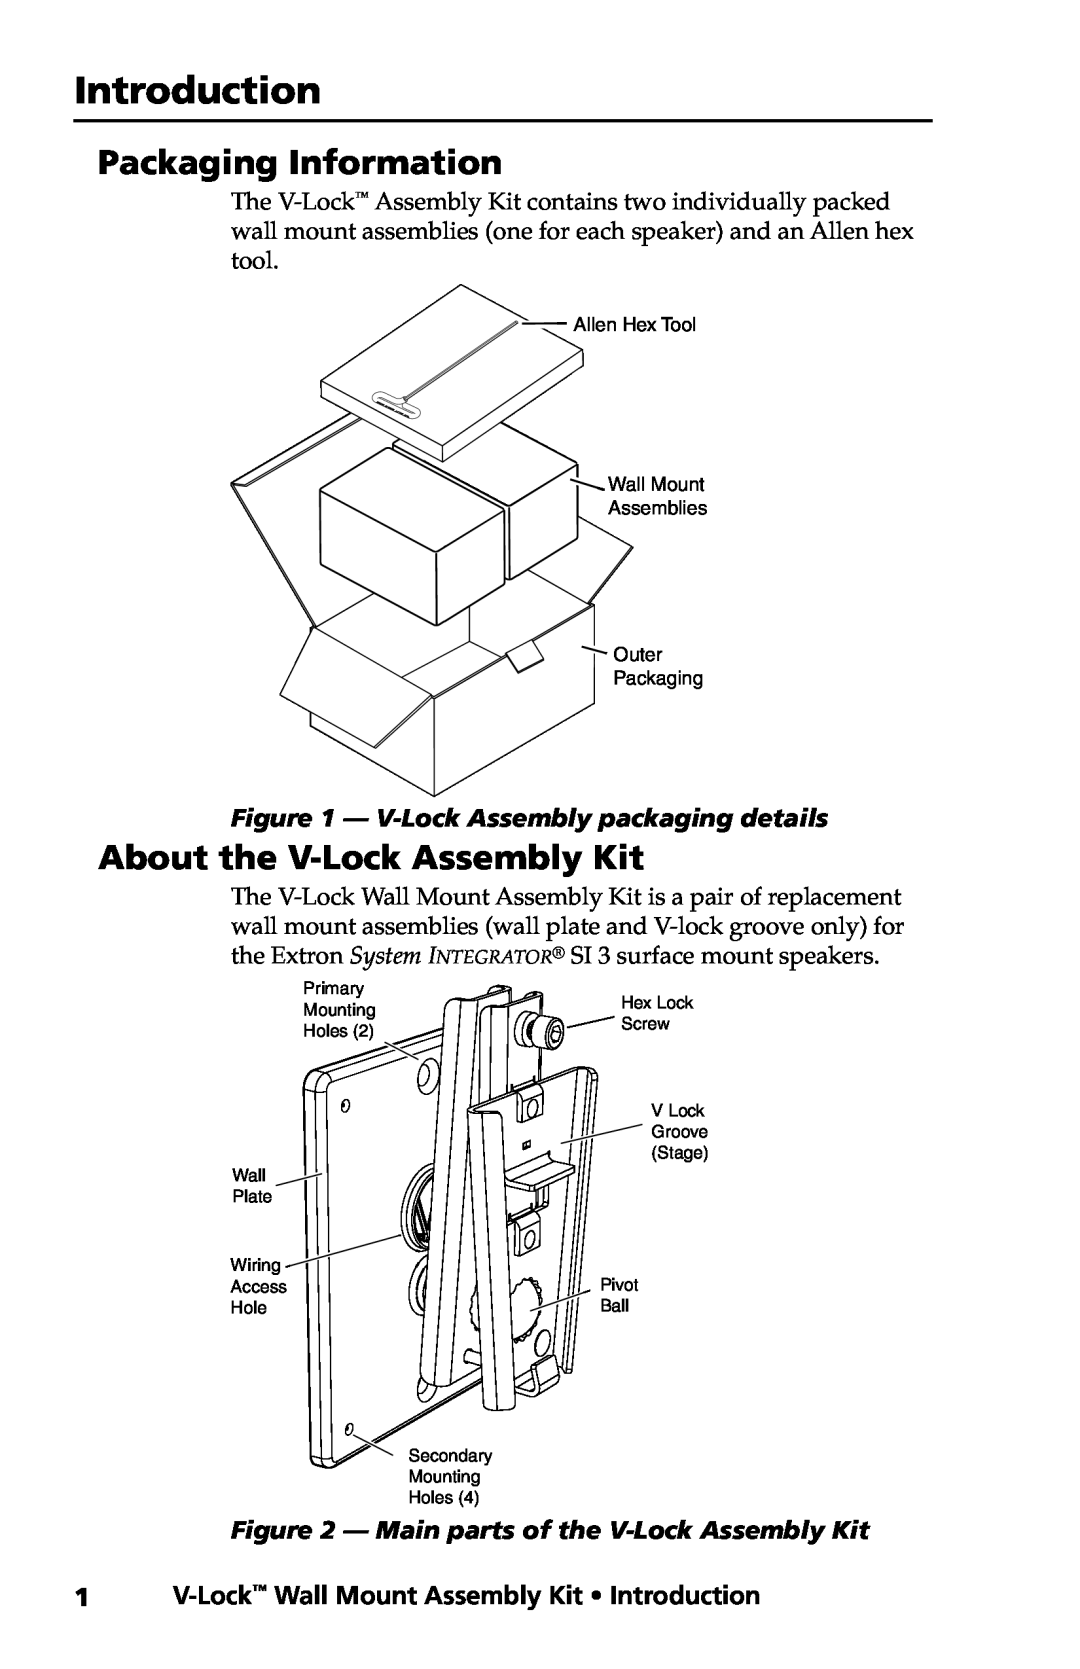 Extron electronic V-LockTM manual Introduction, Packaging Information, About the V-LockAssembly Kit 